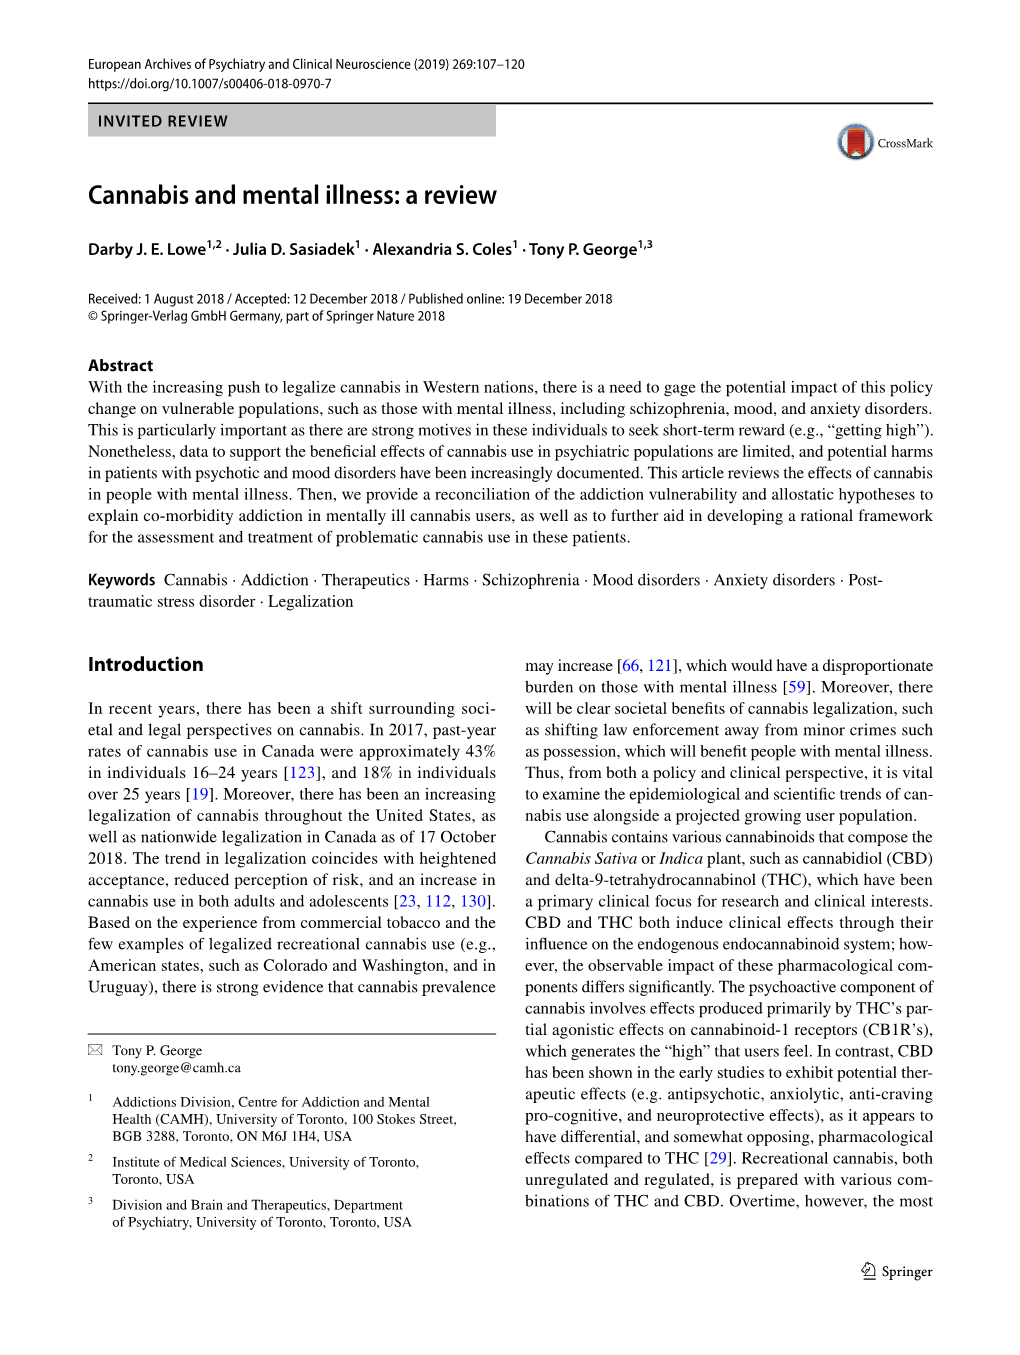 Cannabis and Mental Illness: a Review